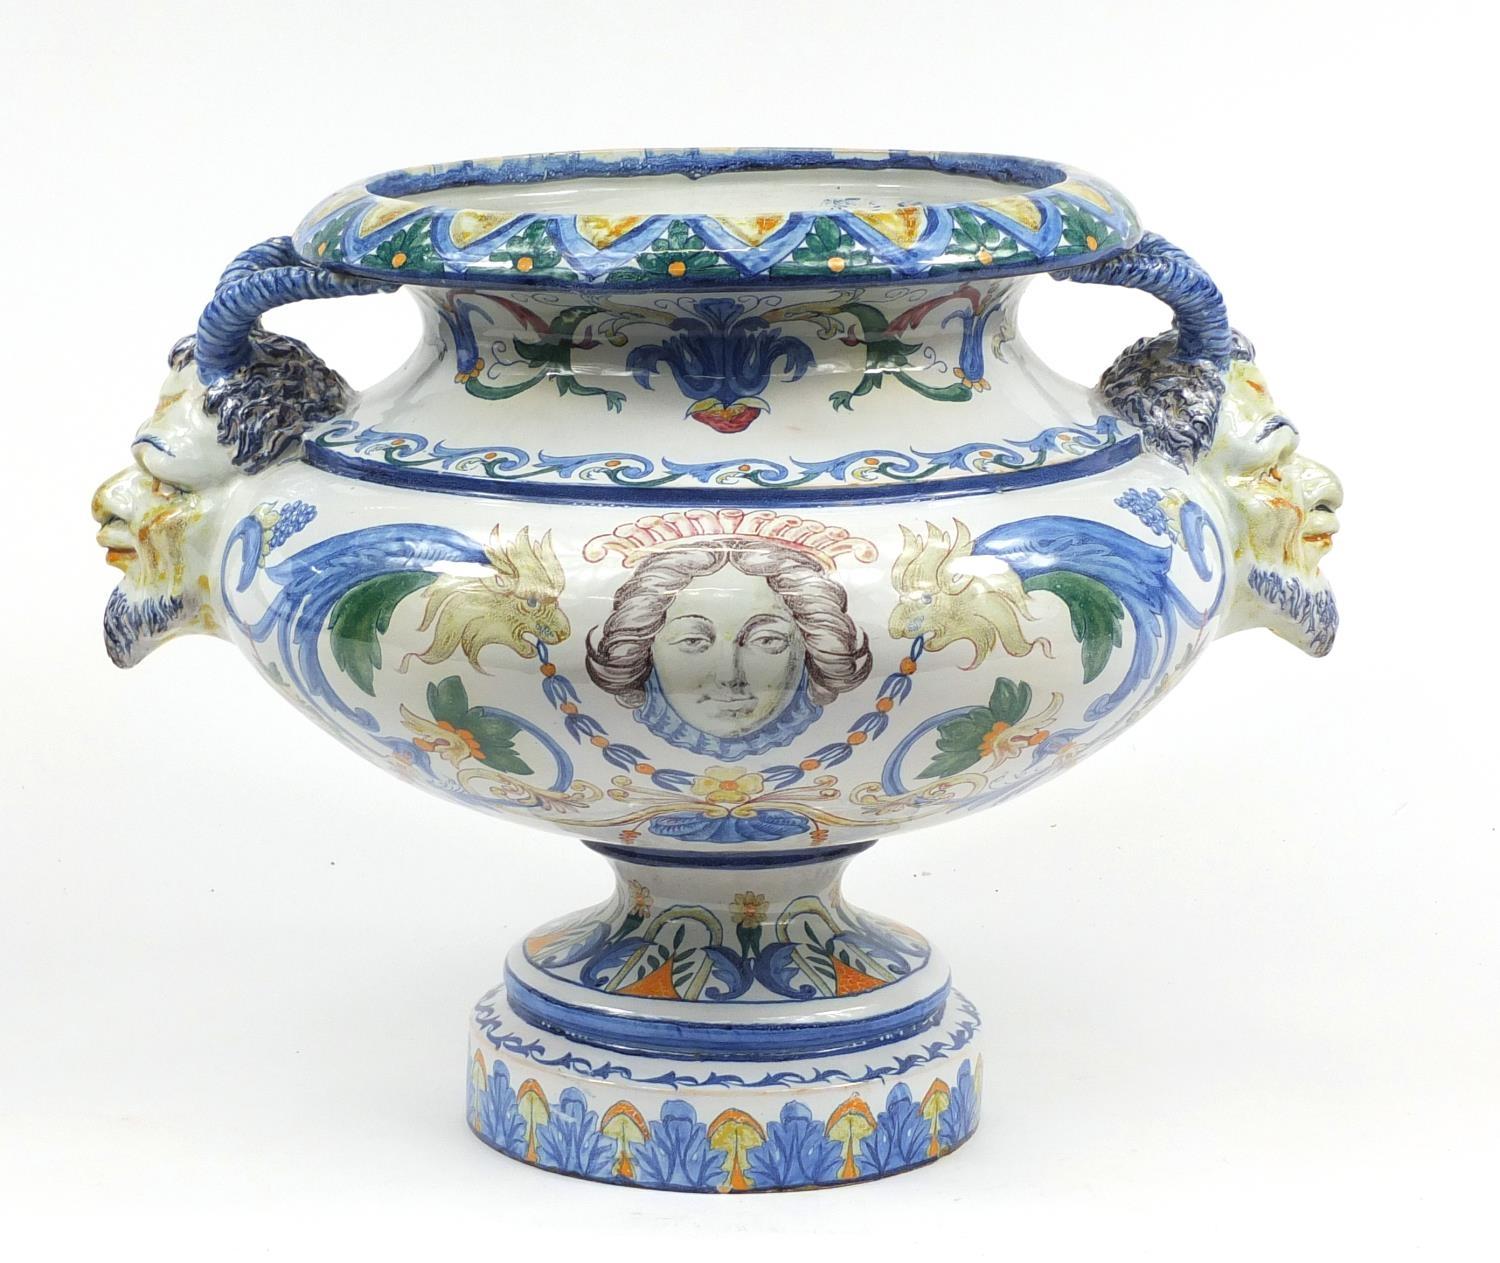 Large continental Faience glazed pottery centrepiece with twin handles, hand painted with mythical